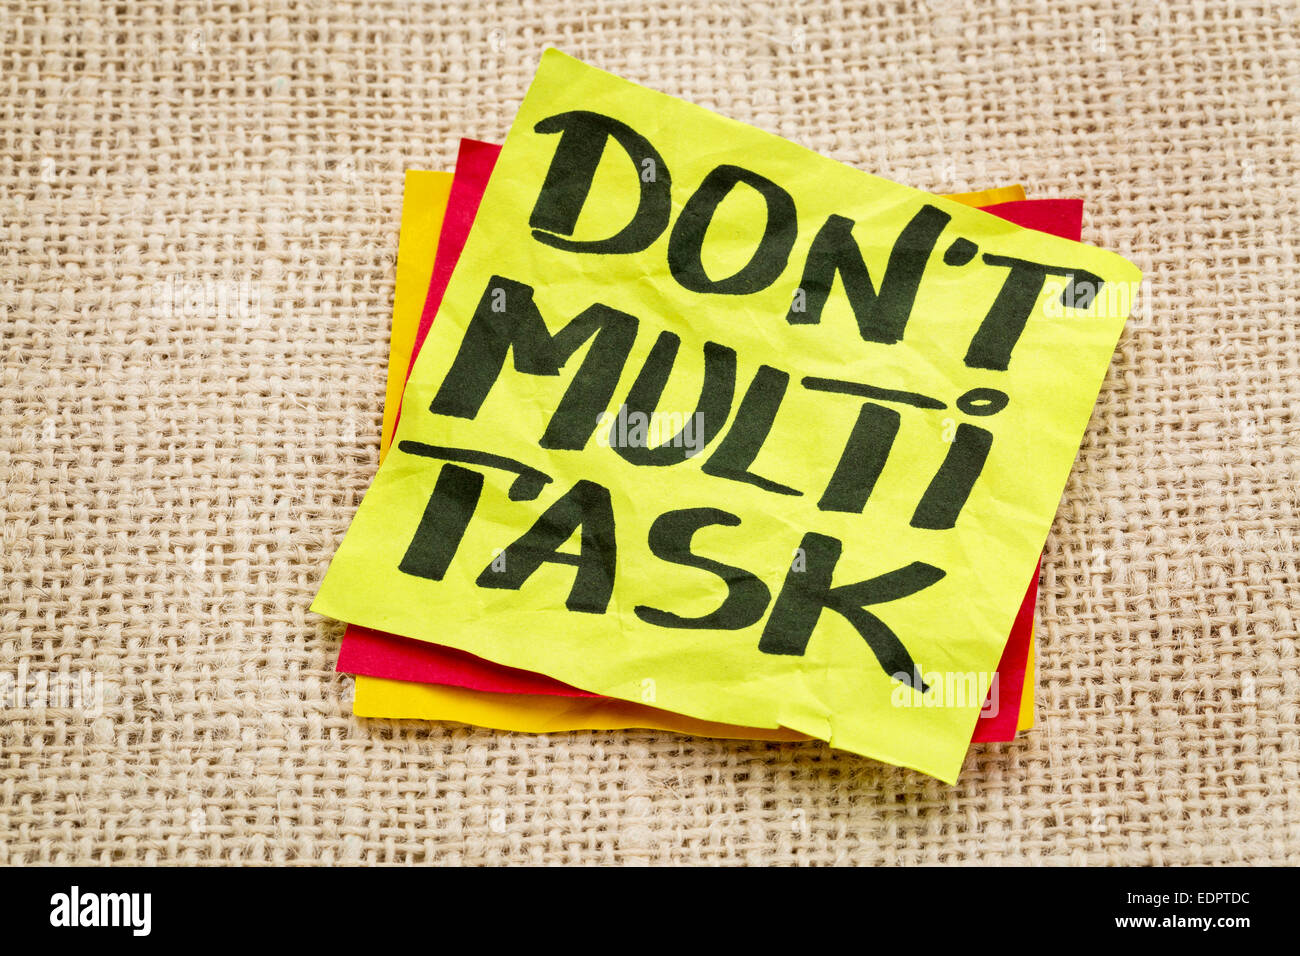 do not multitask - efficiency advice on a sticky note against burlap canvas Stock Photo